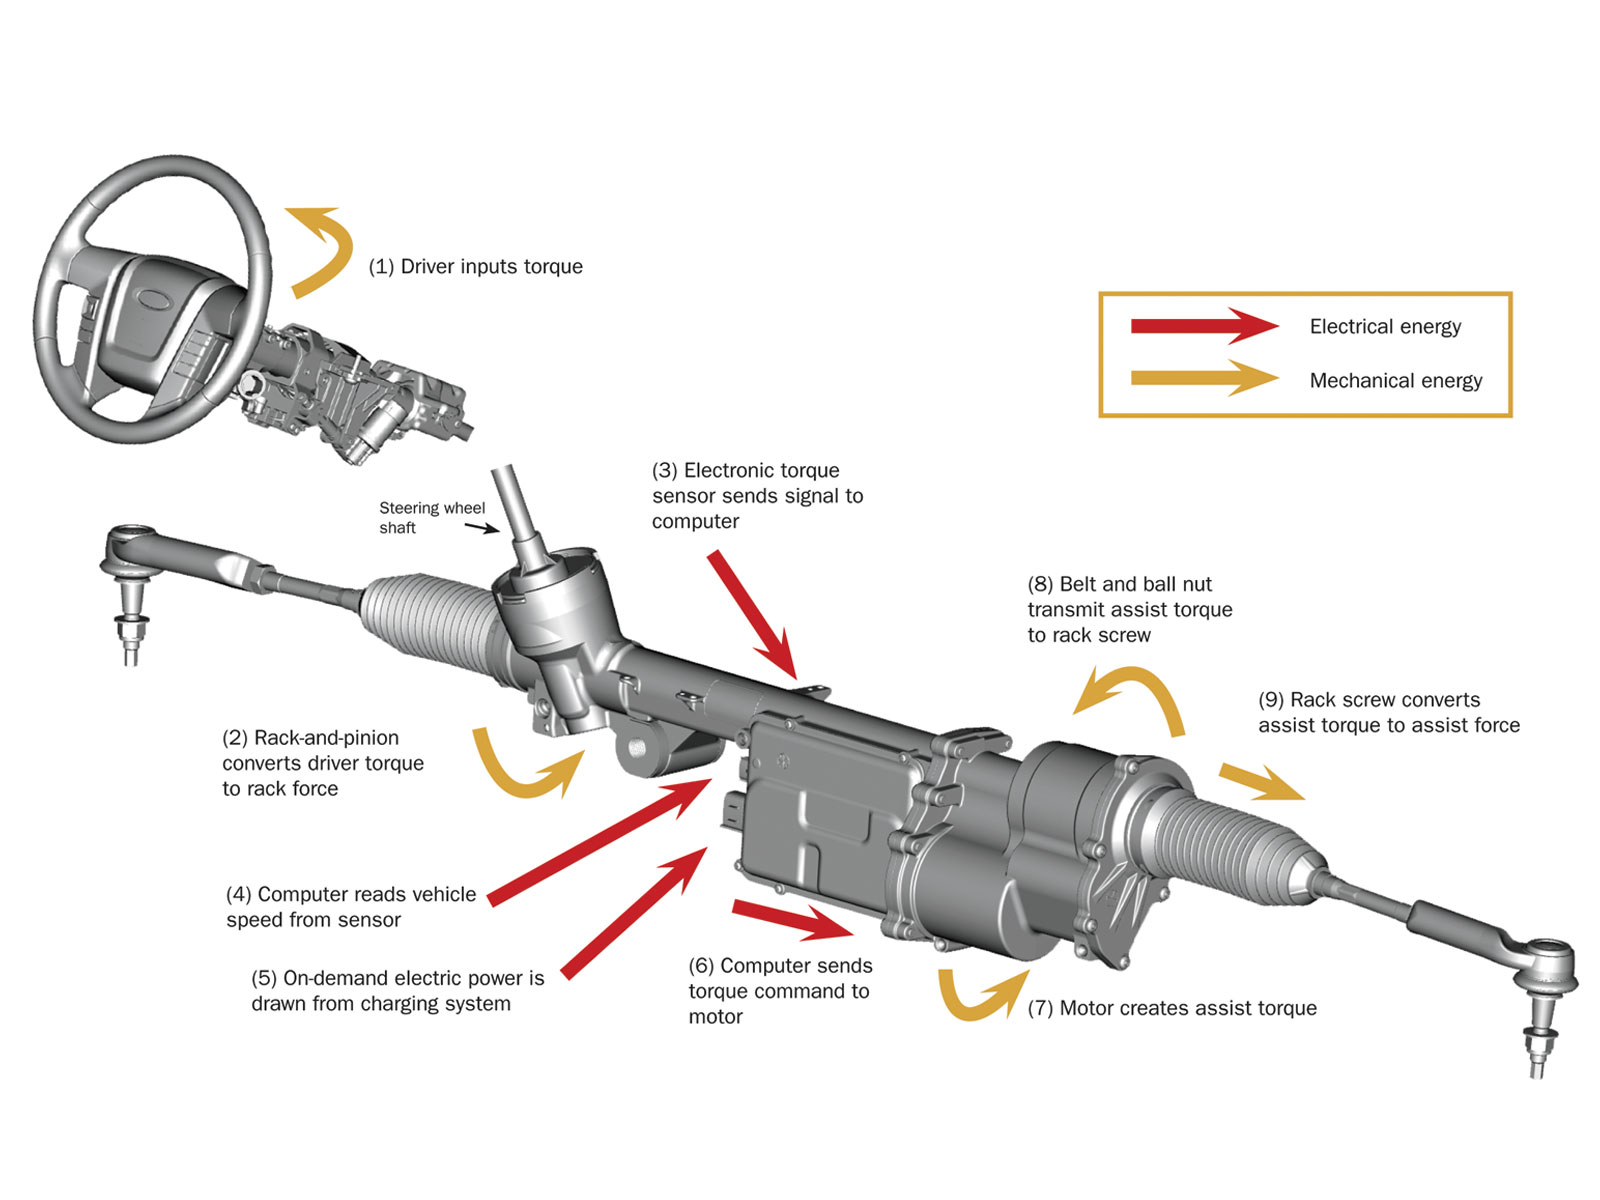 Electric Power Assisted Steering